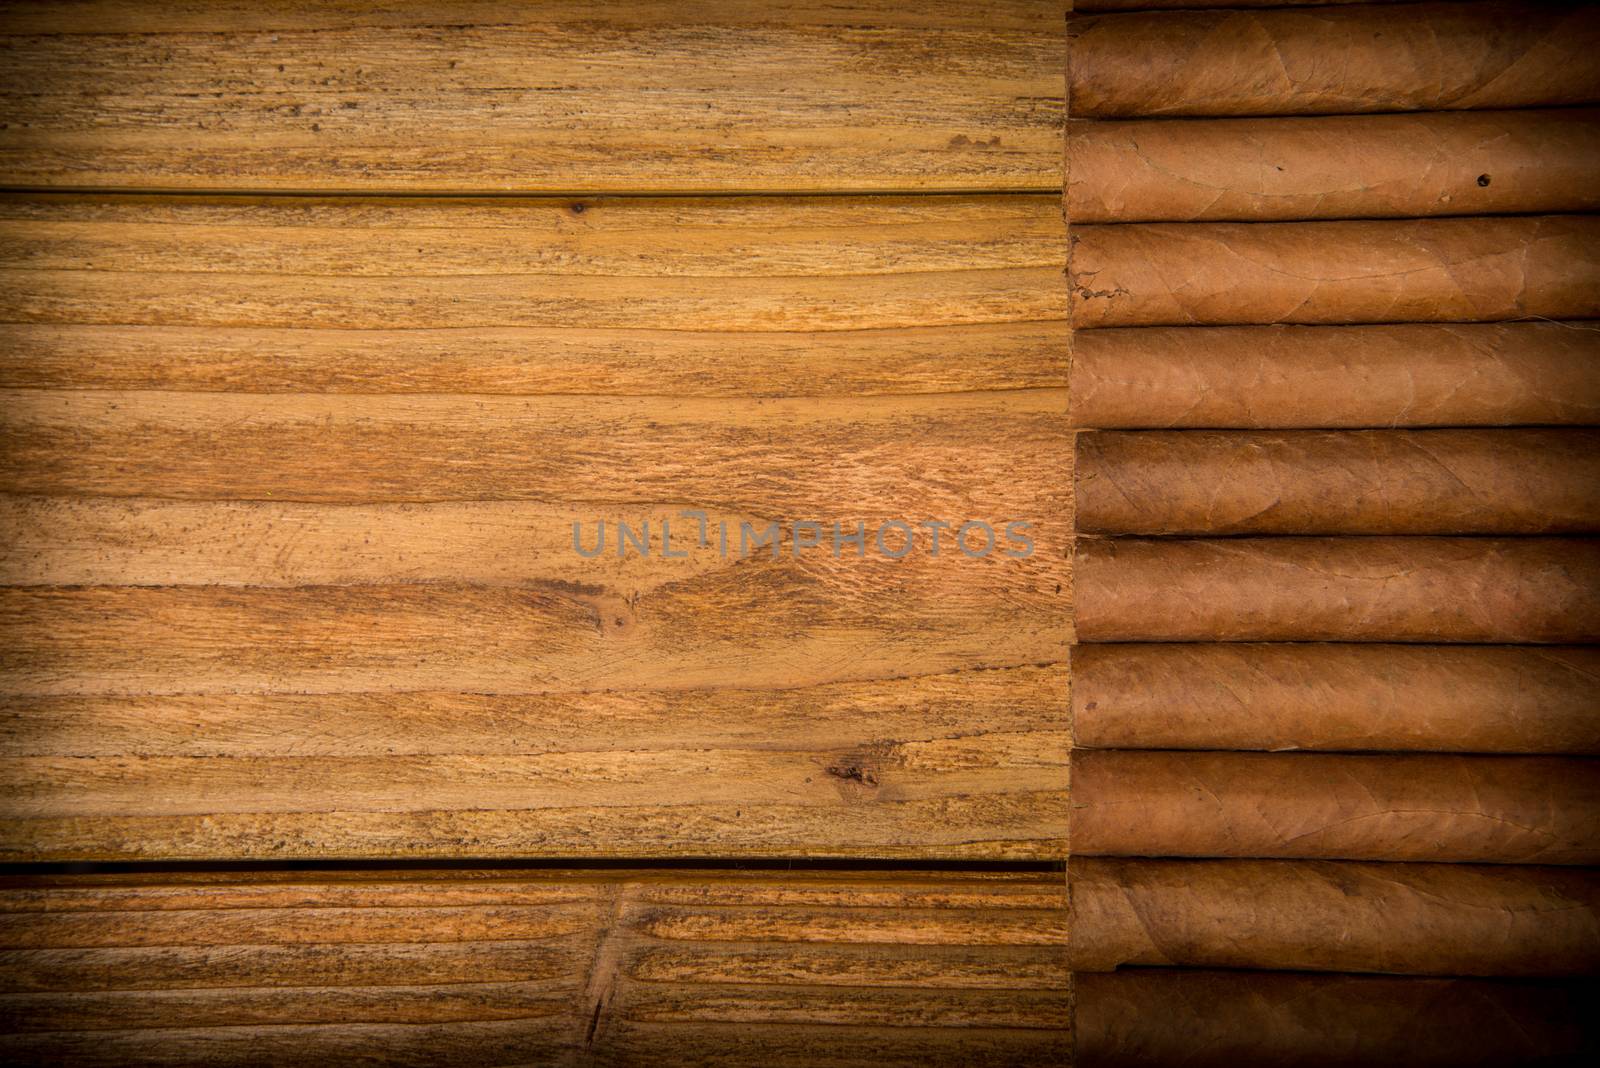 Cuban cigars on rustic wooden table in line on the edge of background